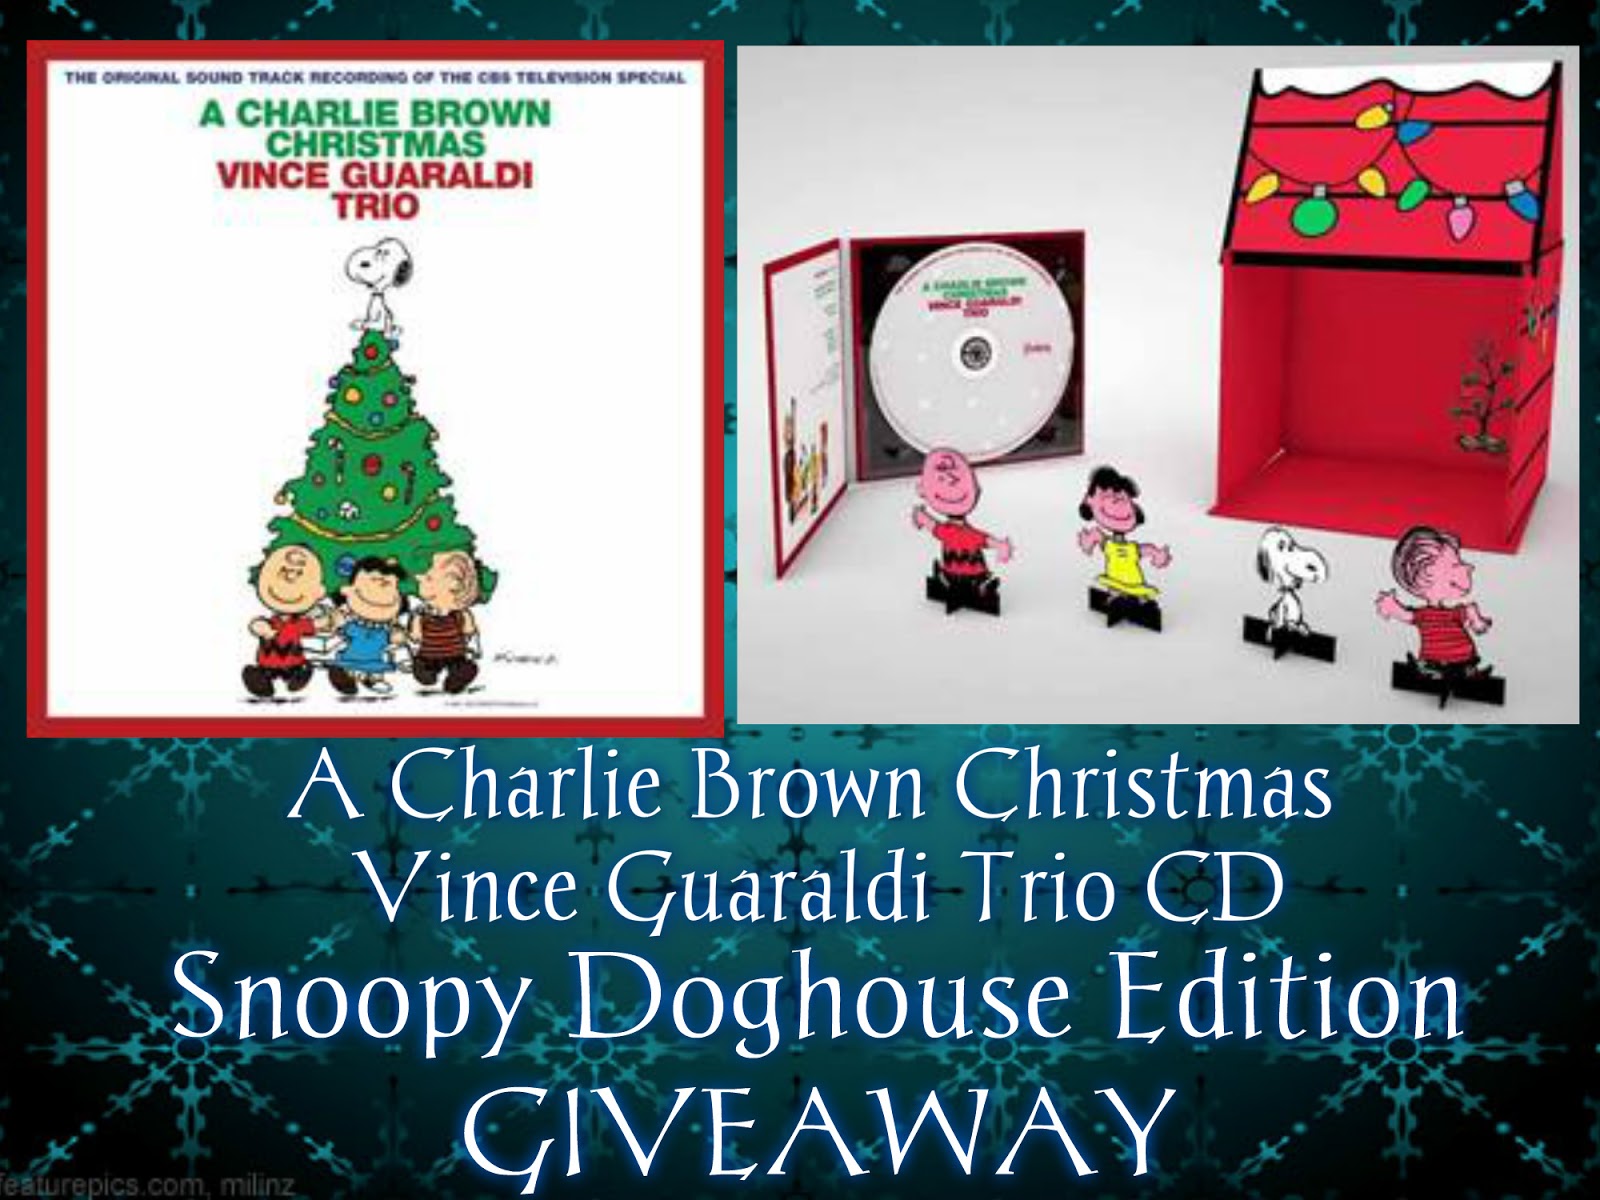 GIVEAWAY “Snoopy Doghouse Edition A Charlie Brown Christmas CD